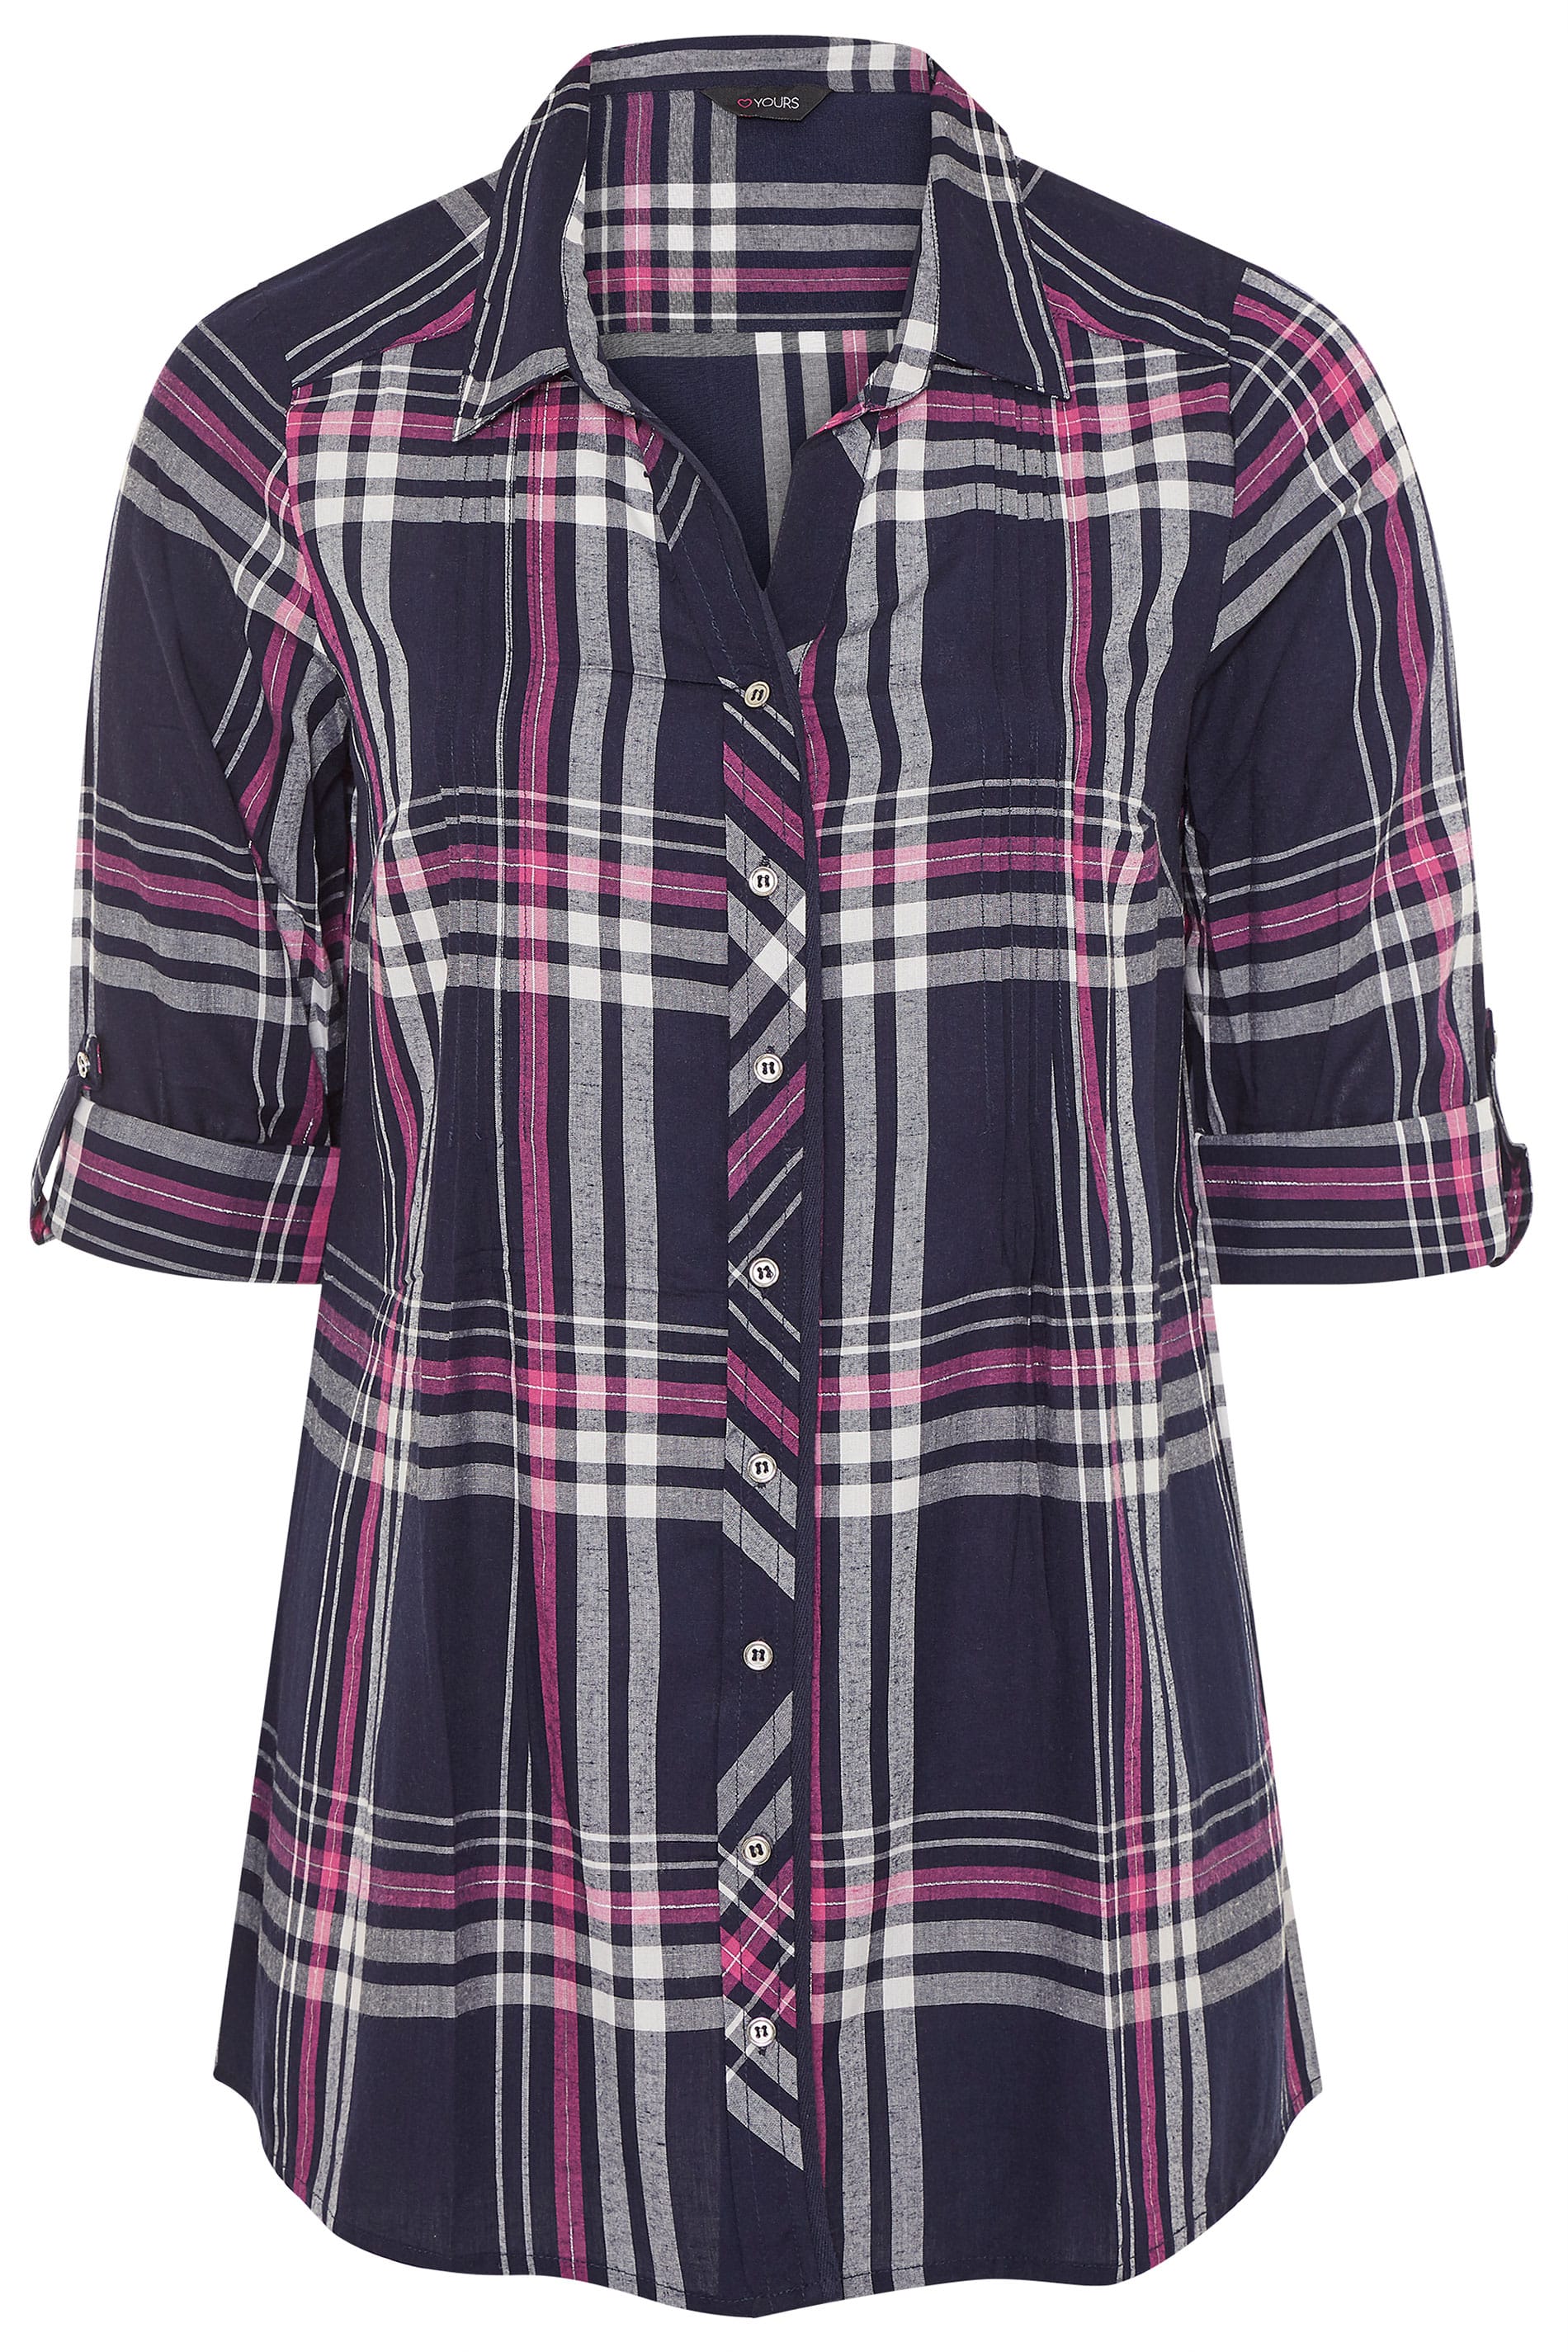 Navy & Pink Check Metallic Pleat Shirt | Yours Clothing